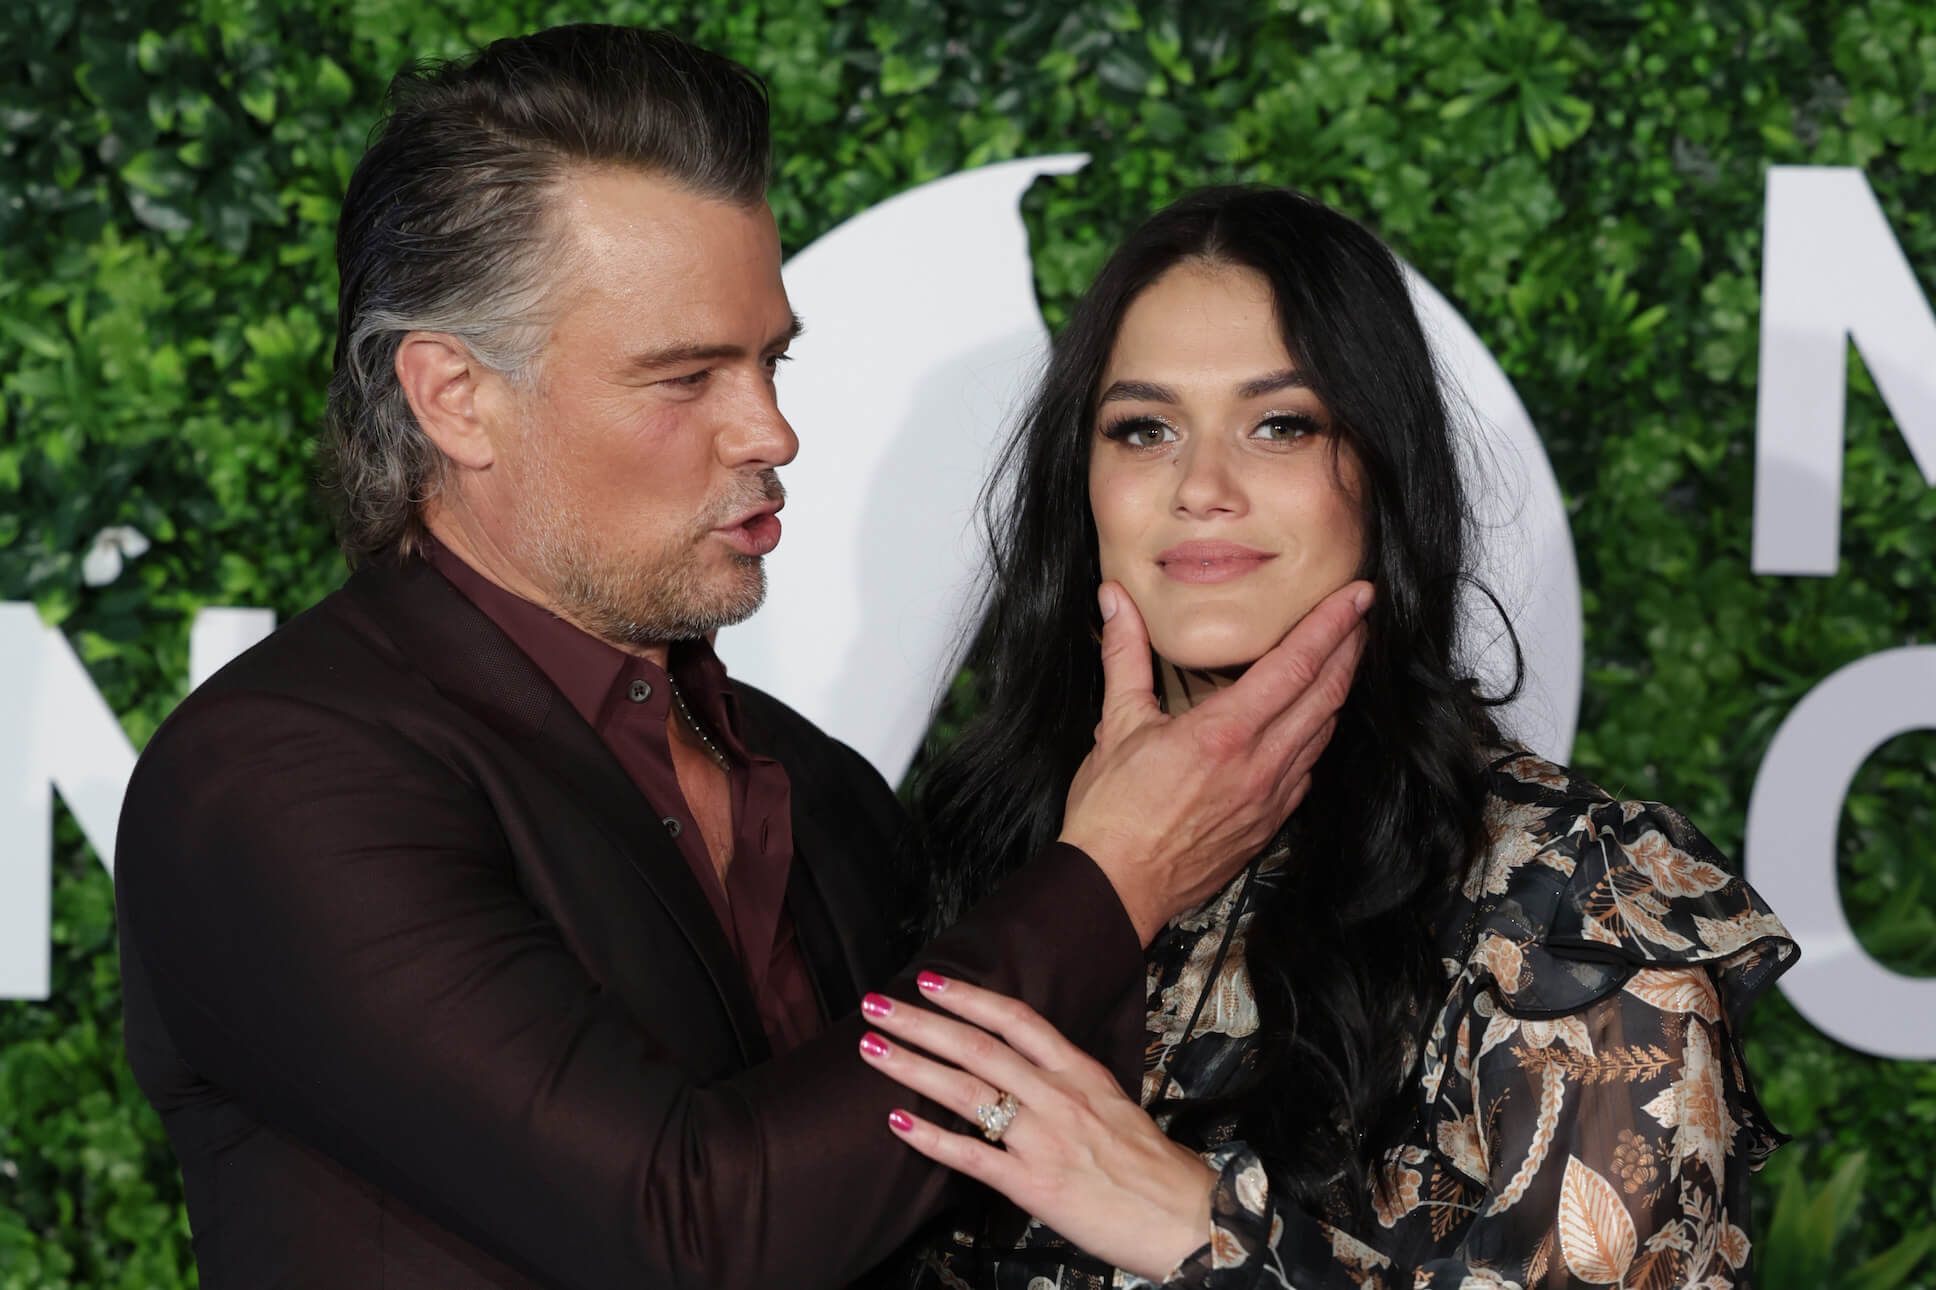 Josh Duhamel holding the face of his wife, Audra Mari, at an event. They have over 20 years age difference